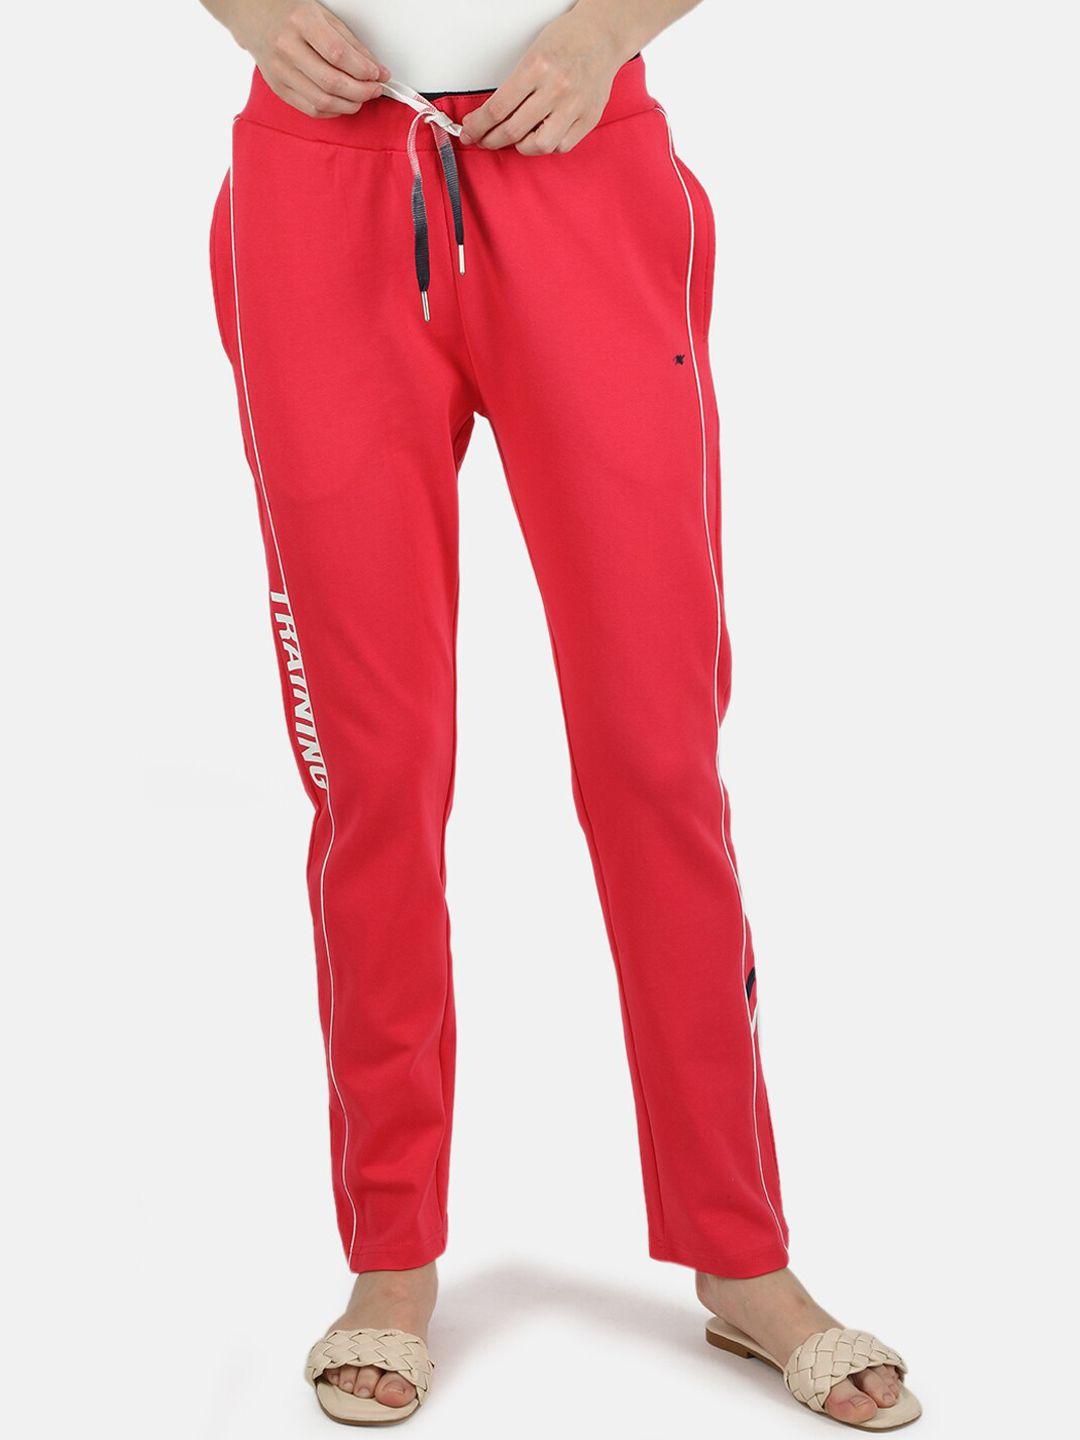 monte carlo red mid-rise lounge pants